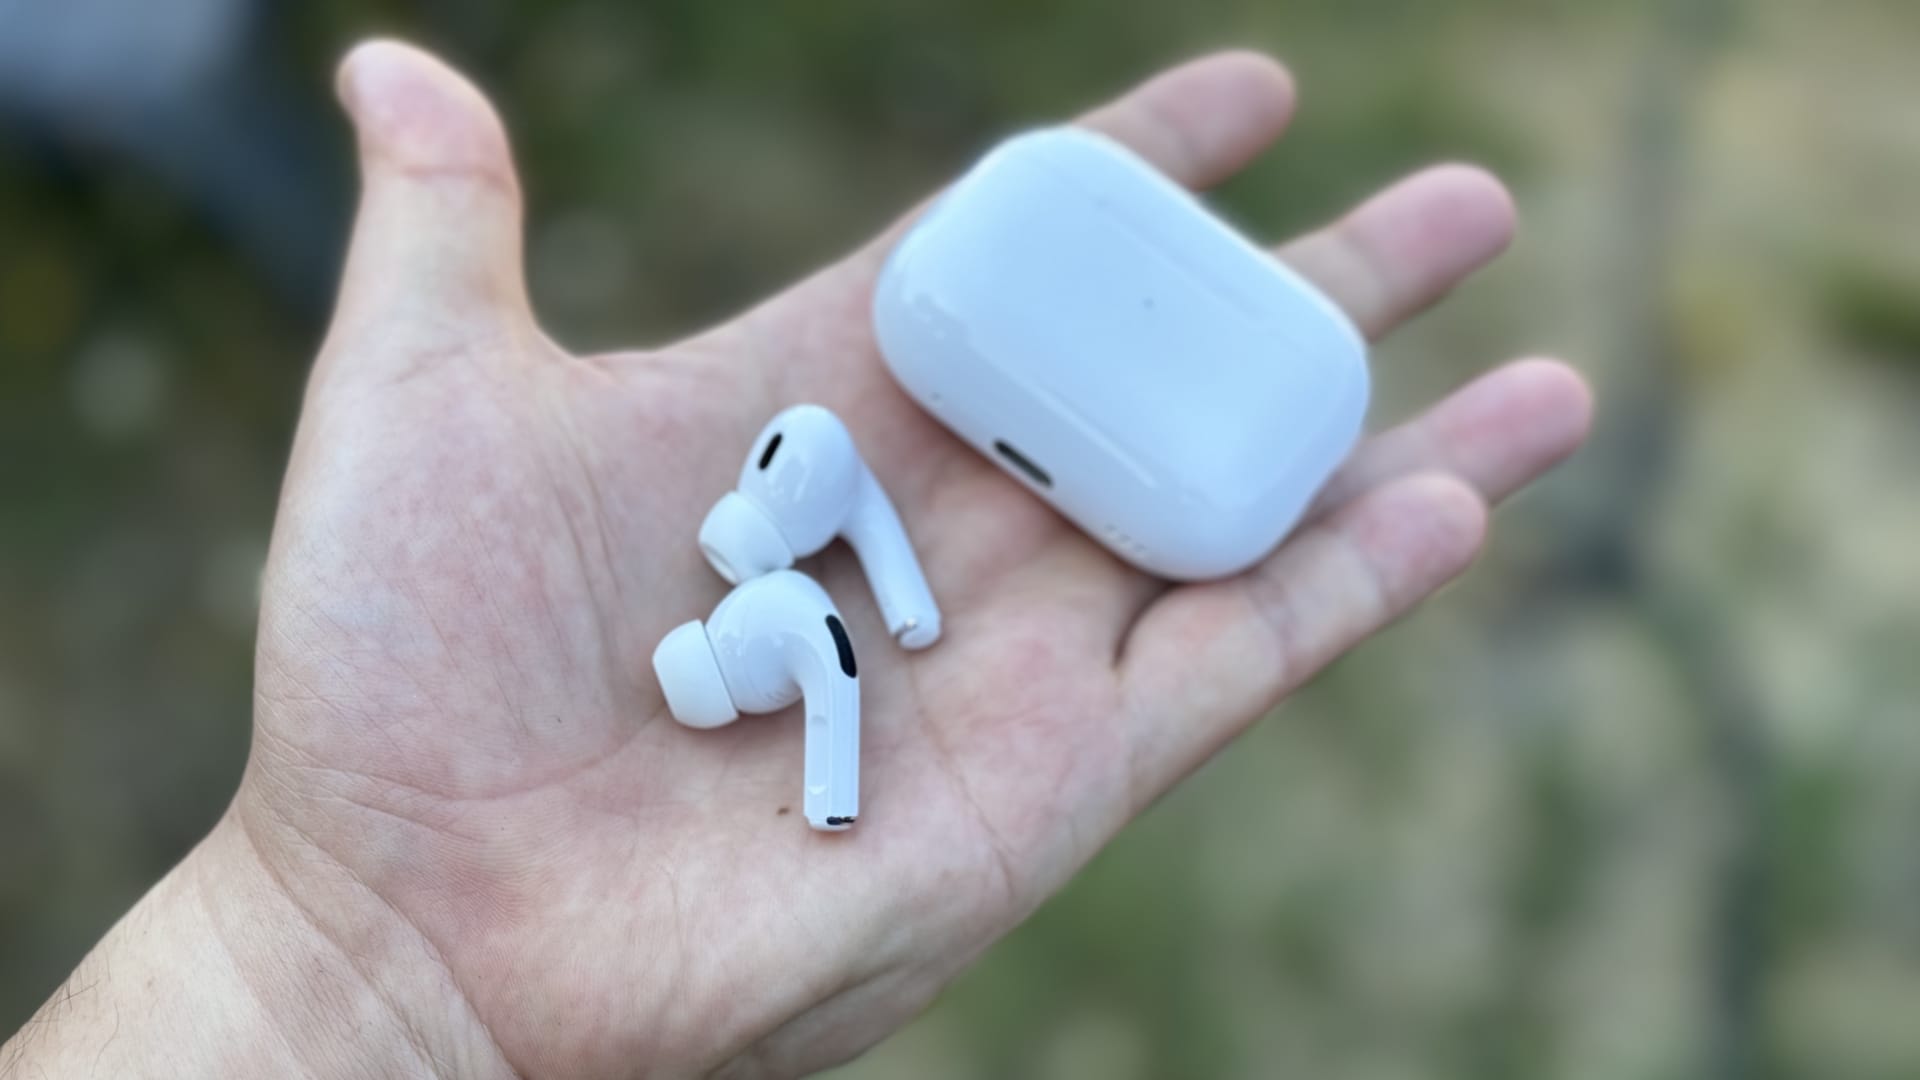 Apple's new AirPods won't have to be taken out of your ears as often, thanks to sophisticated AI